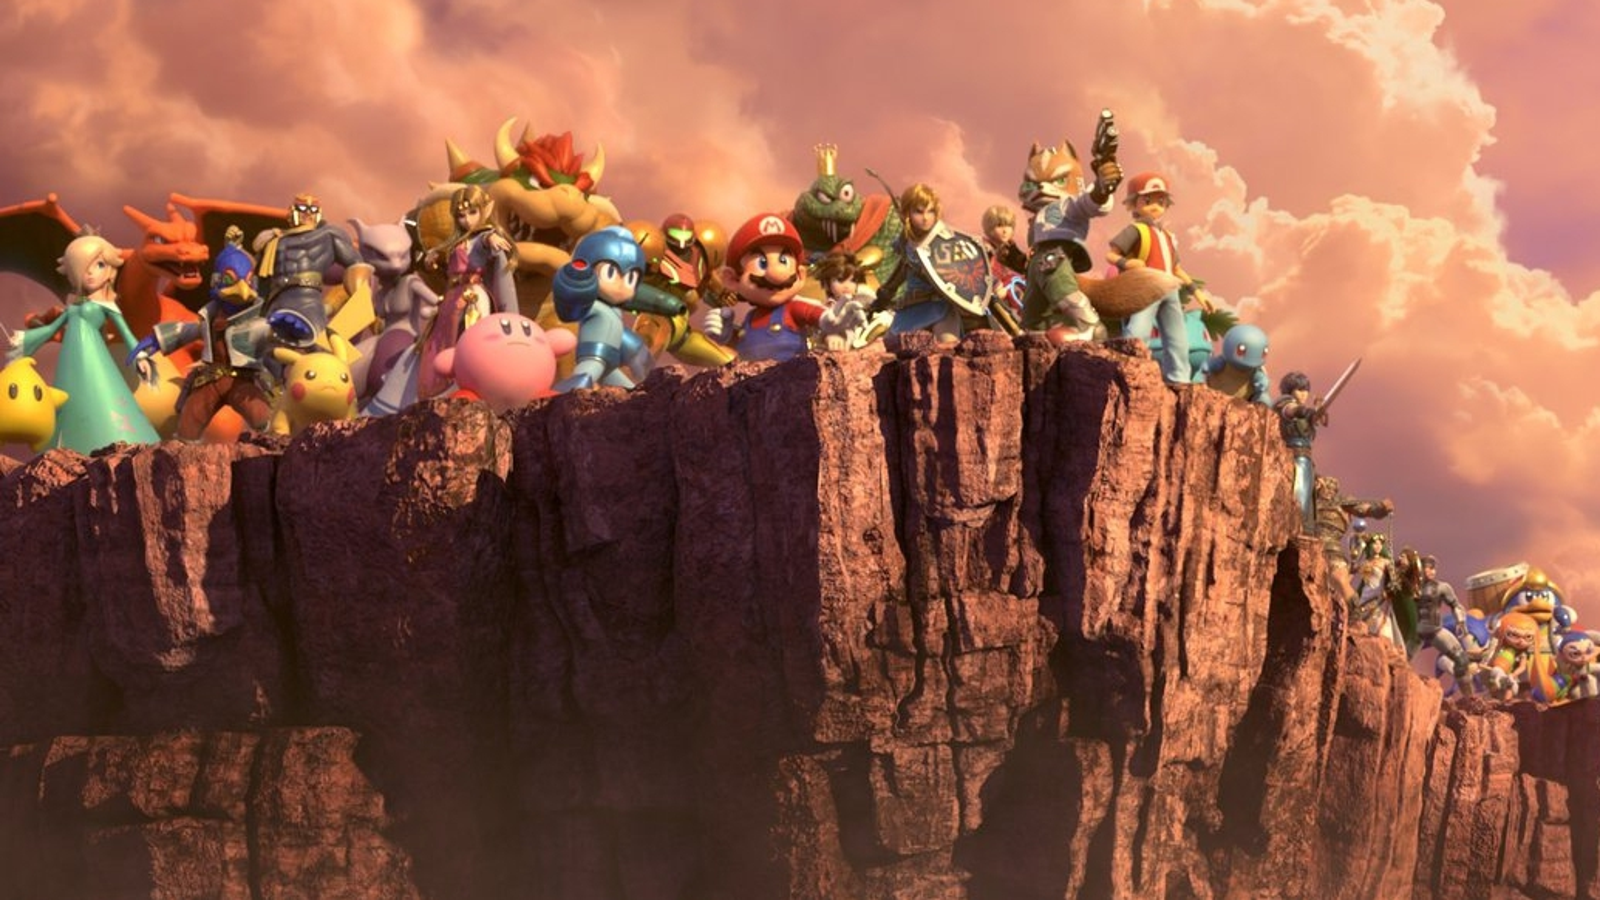 Super Smash Bros. Ultimate' Is a Massive Monument to Itself